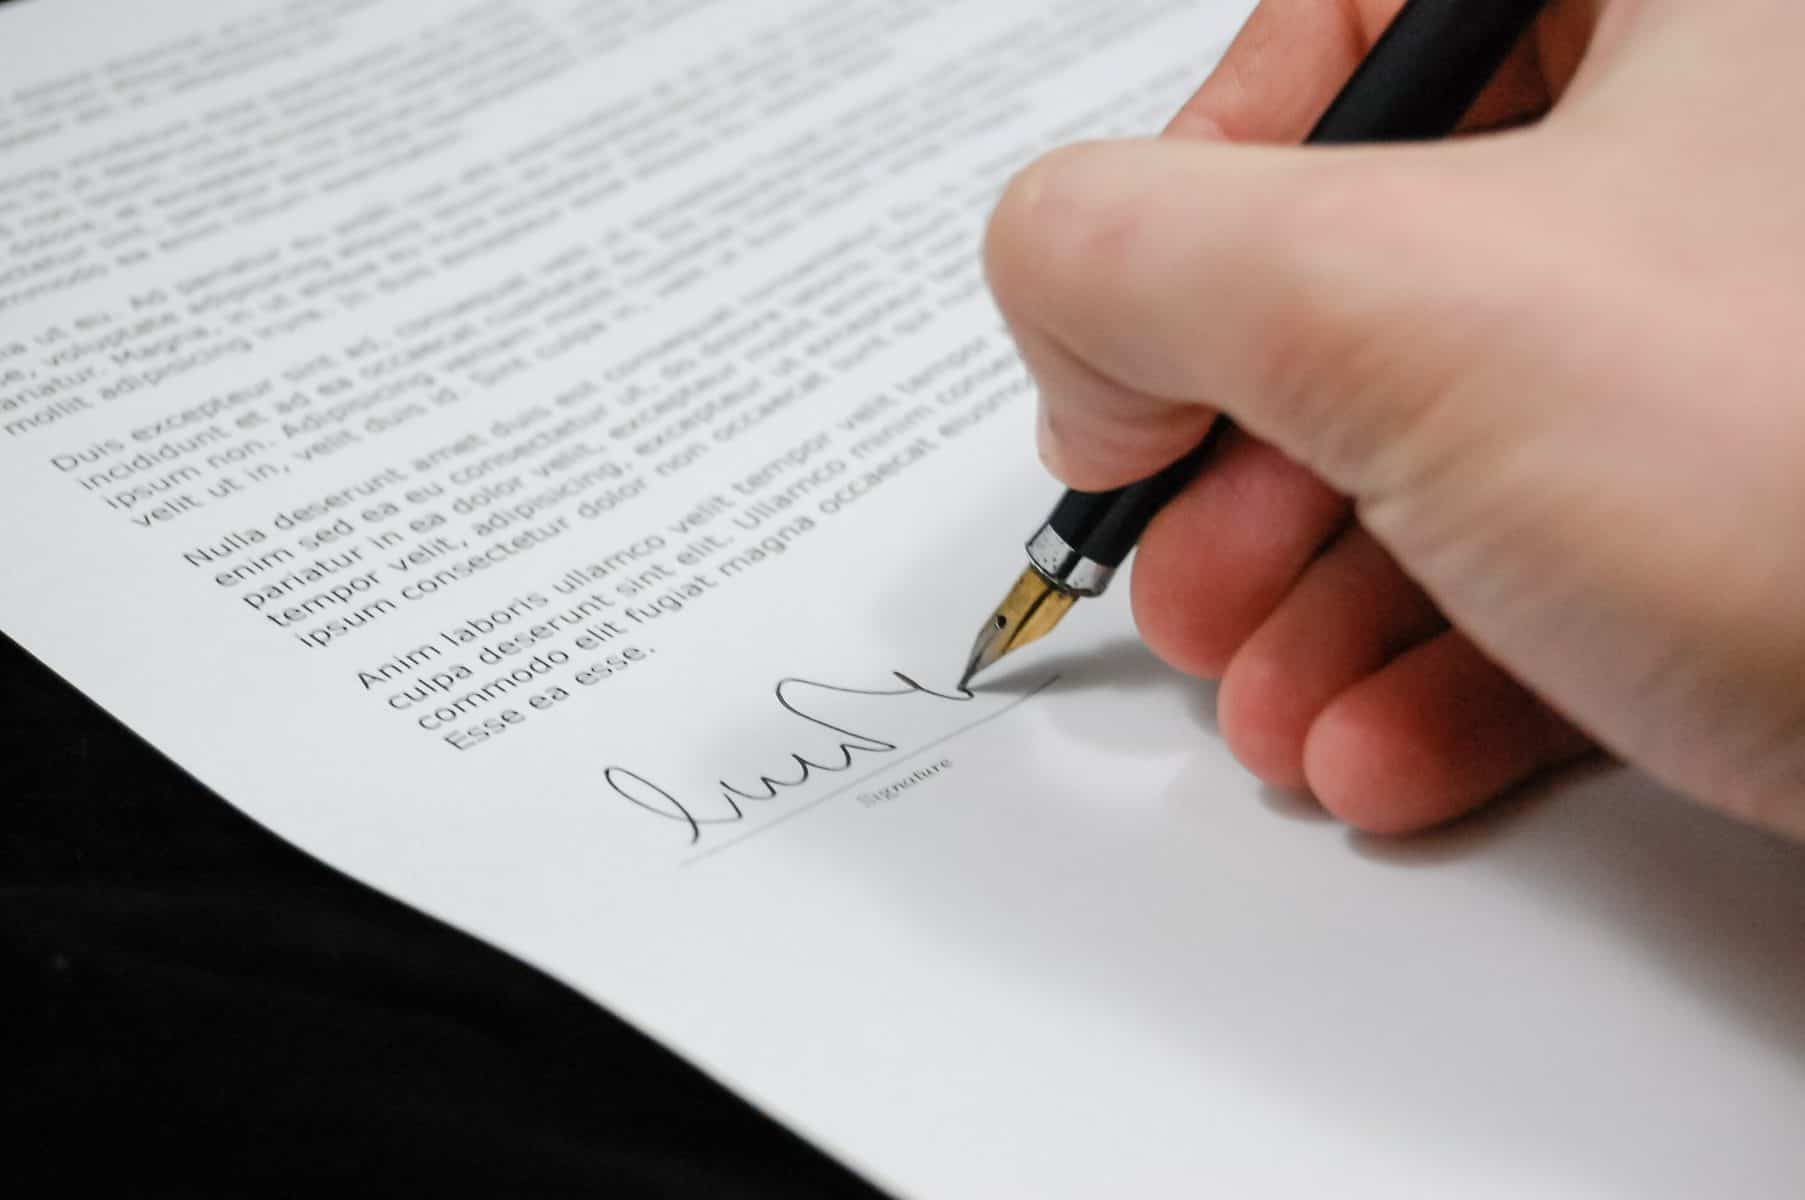 Signing document or deed